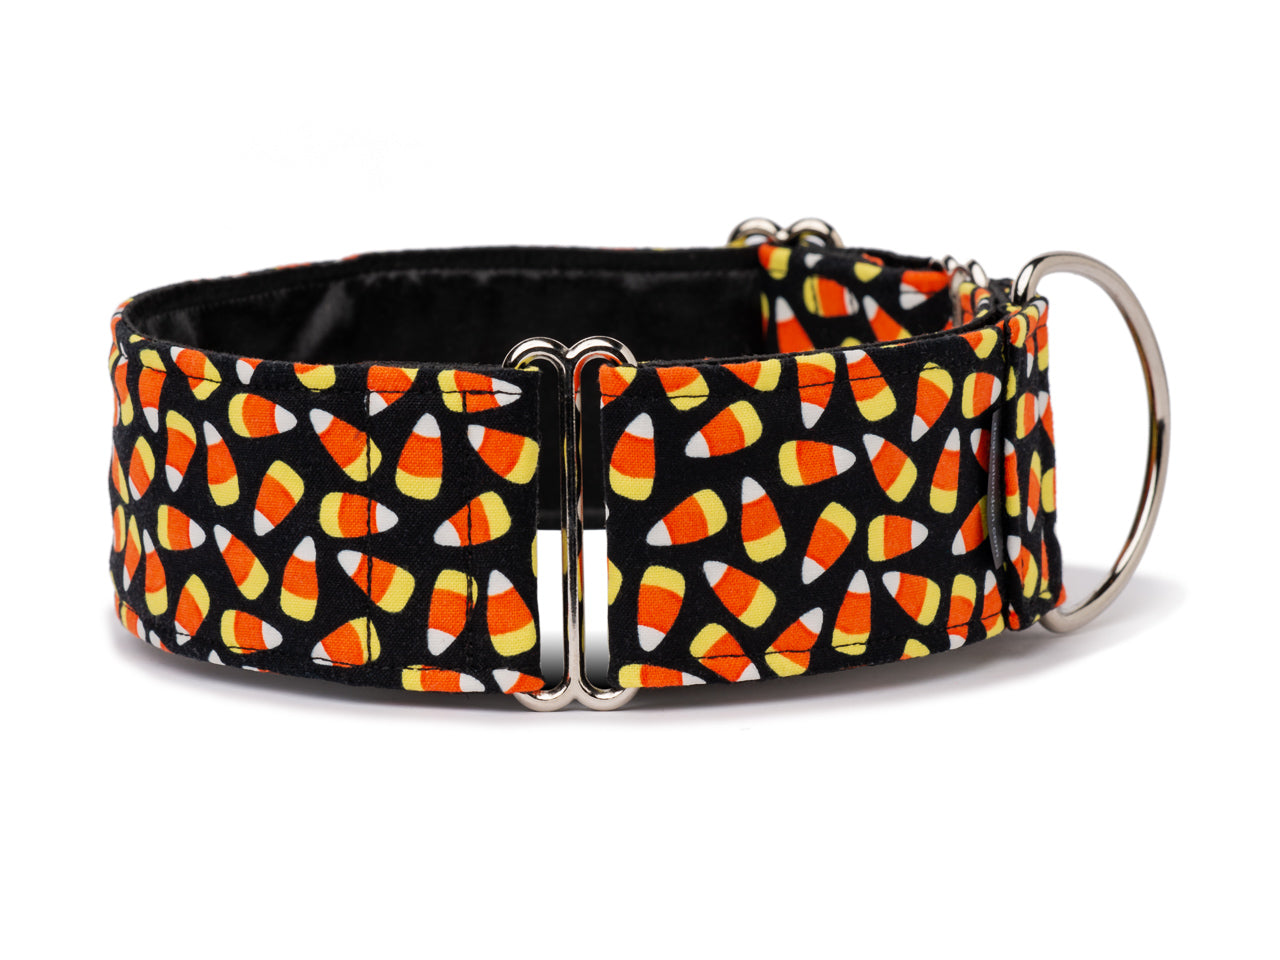 Glow-in-the-dark candy corn makes for a fun Halloween accessory for the stylish hound!